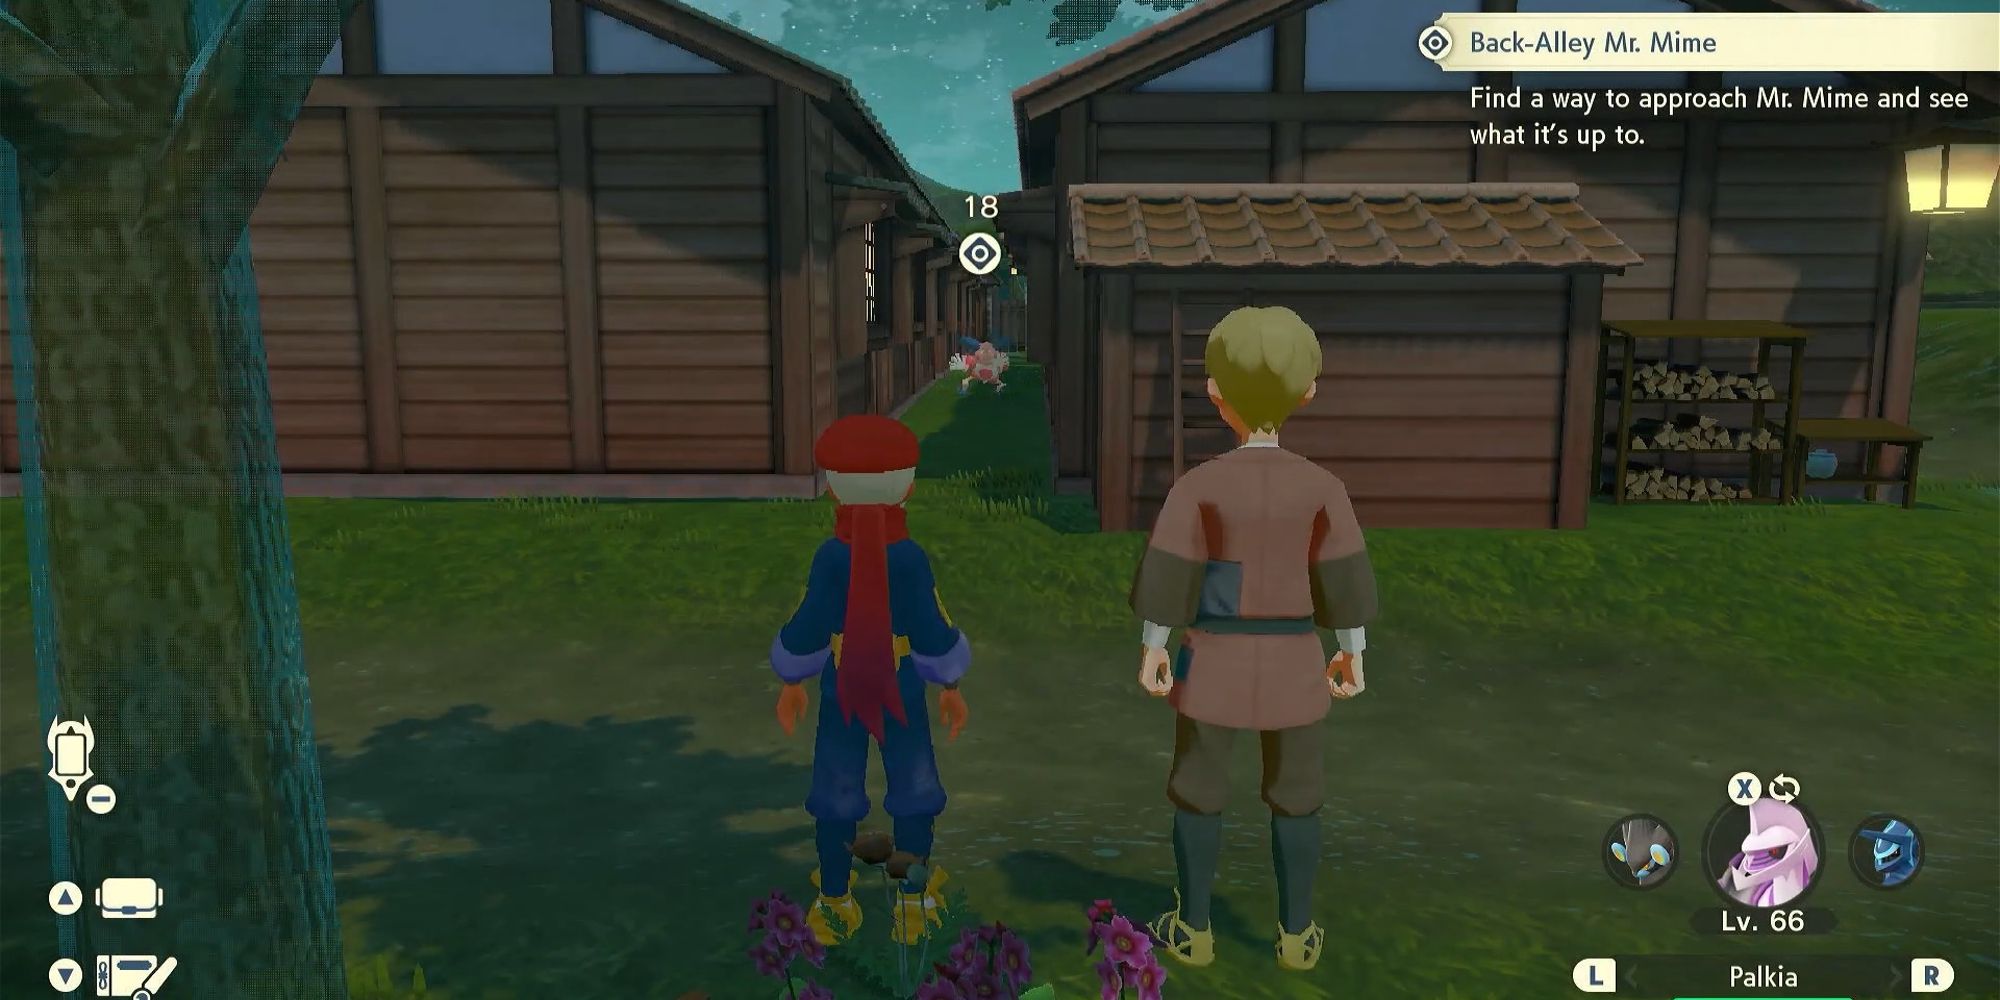 player standing next to andra, looking at mr, mime standing between rows of houses